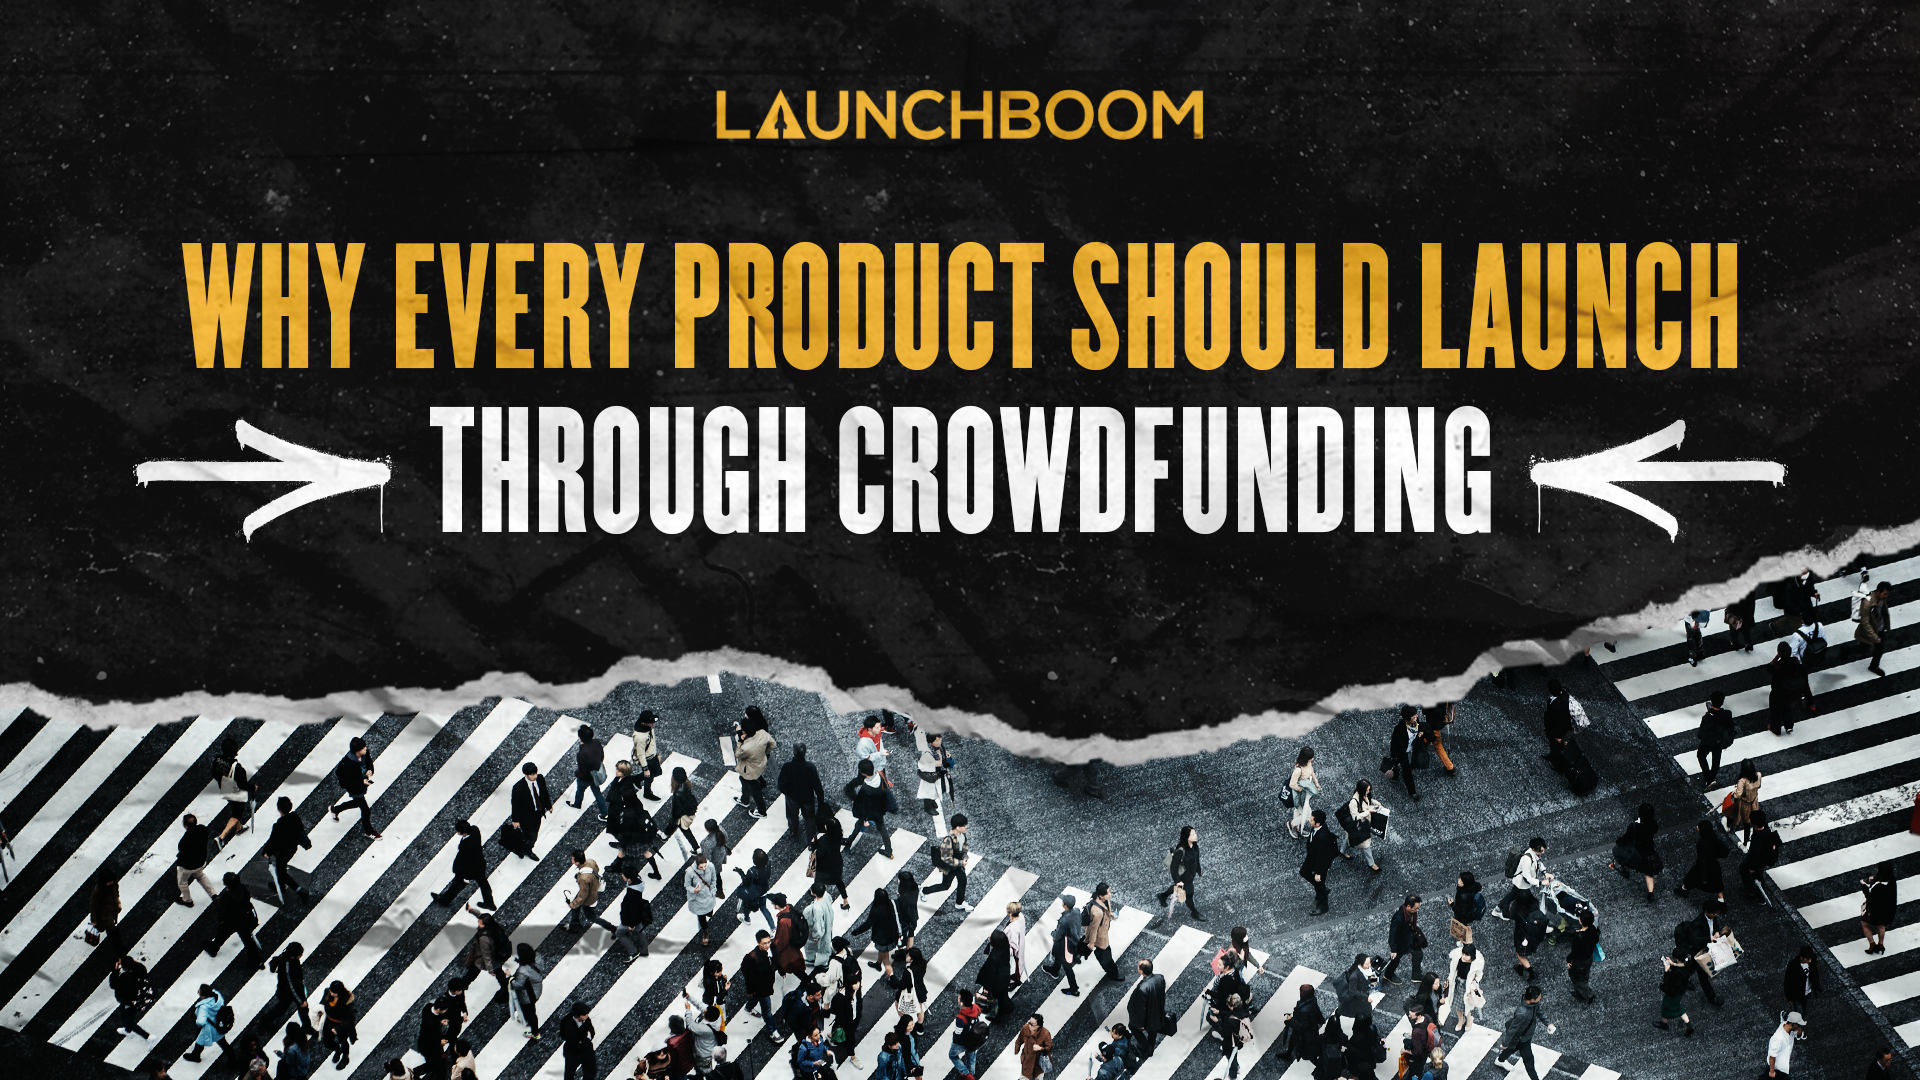 Why every product should launch through crowdfunding